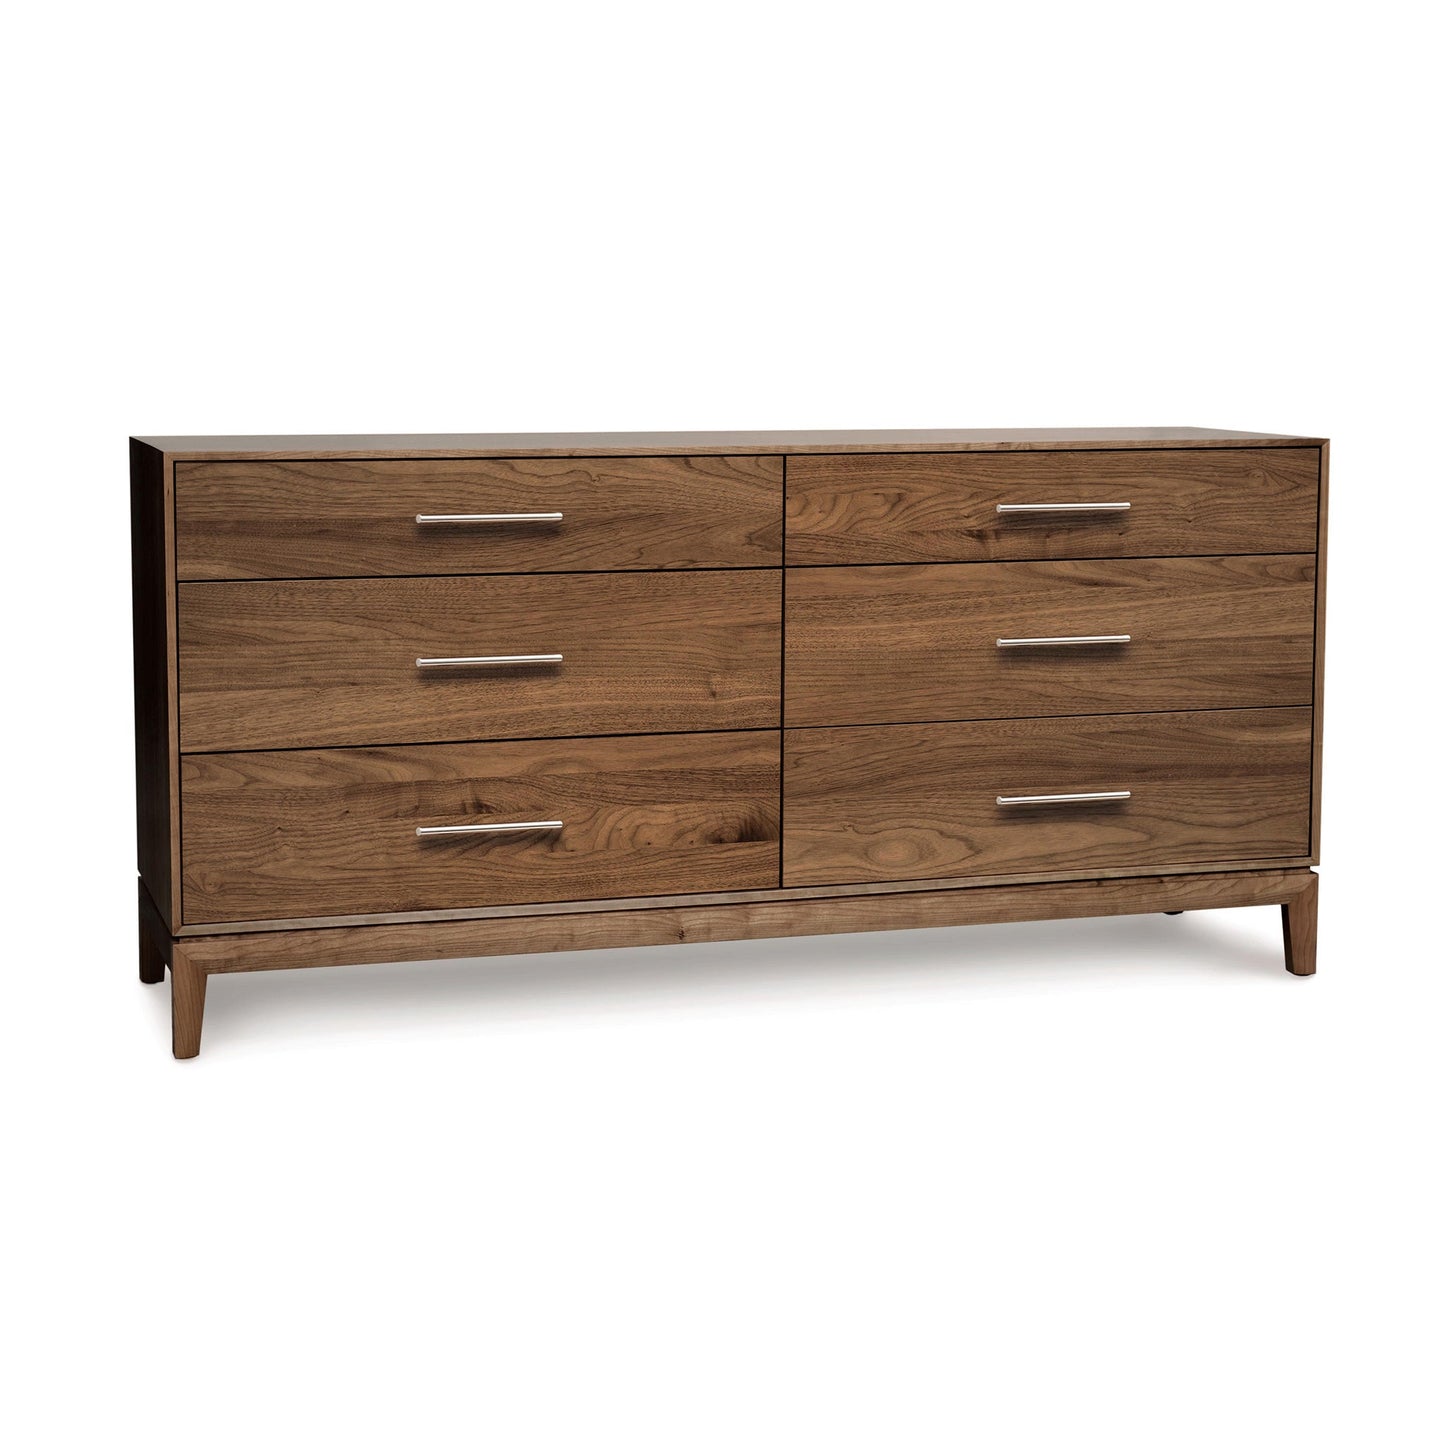 A modern dresser with drawers and metal handles.